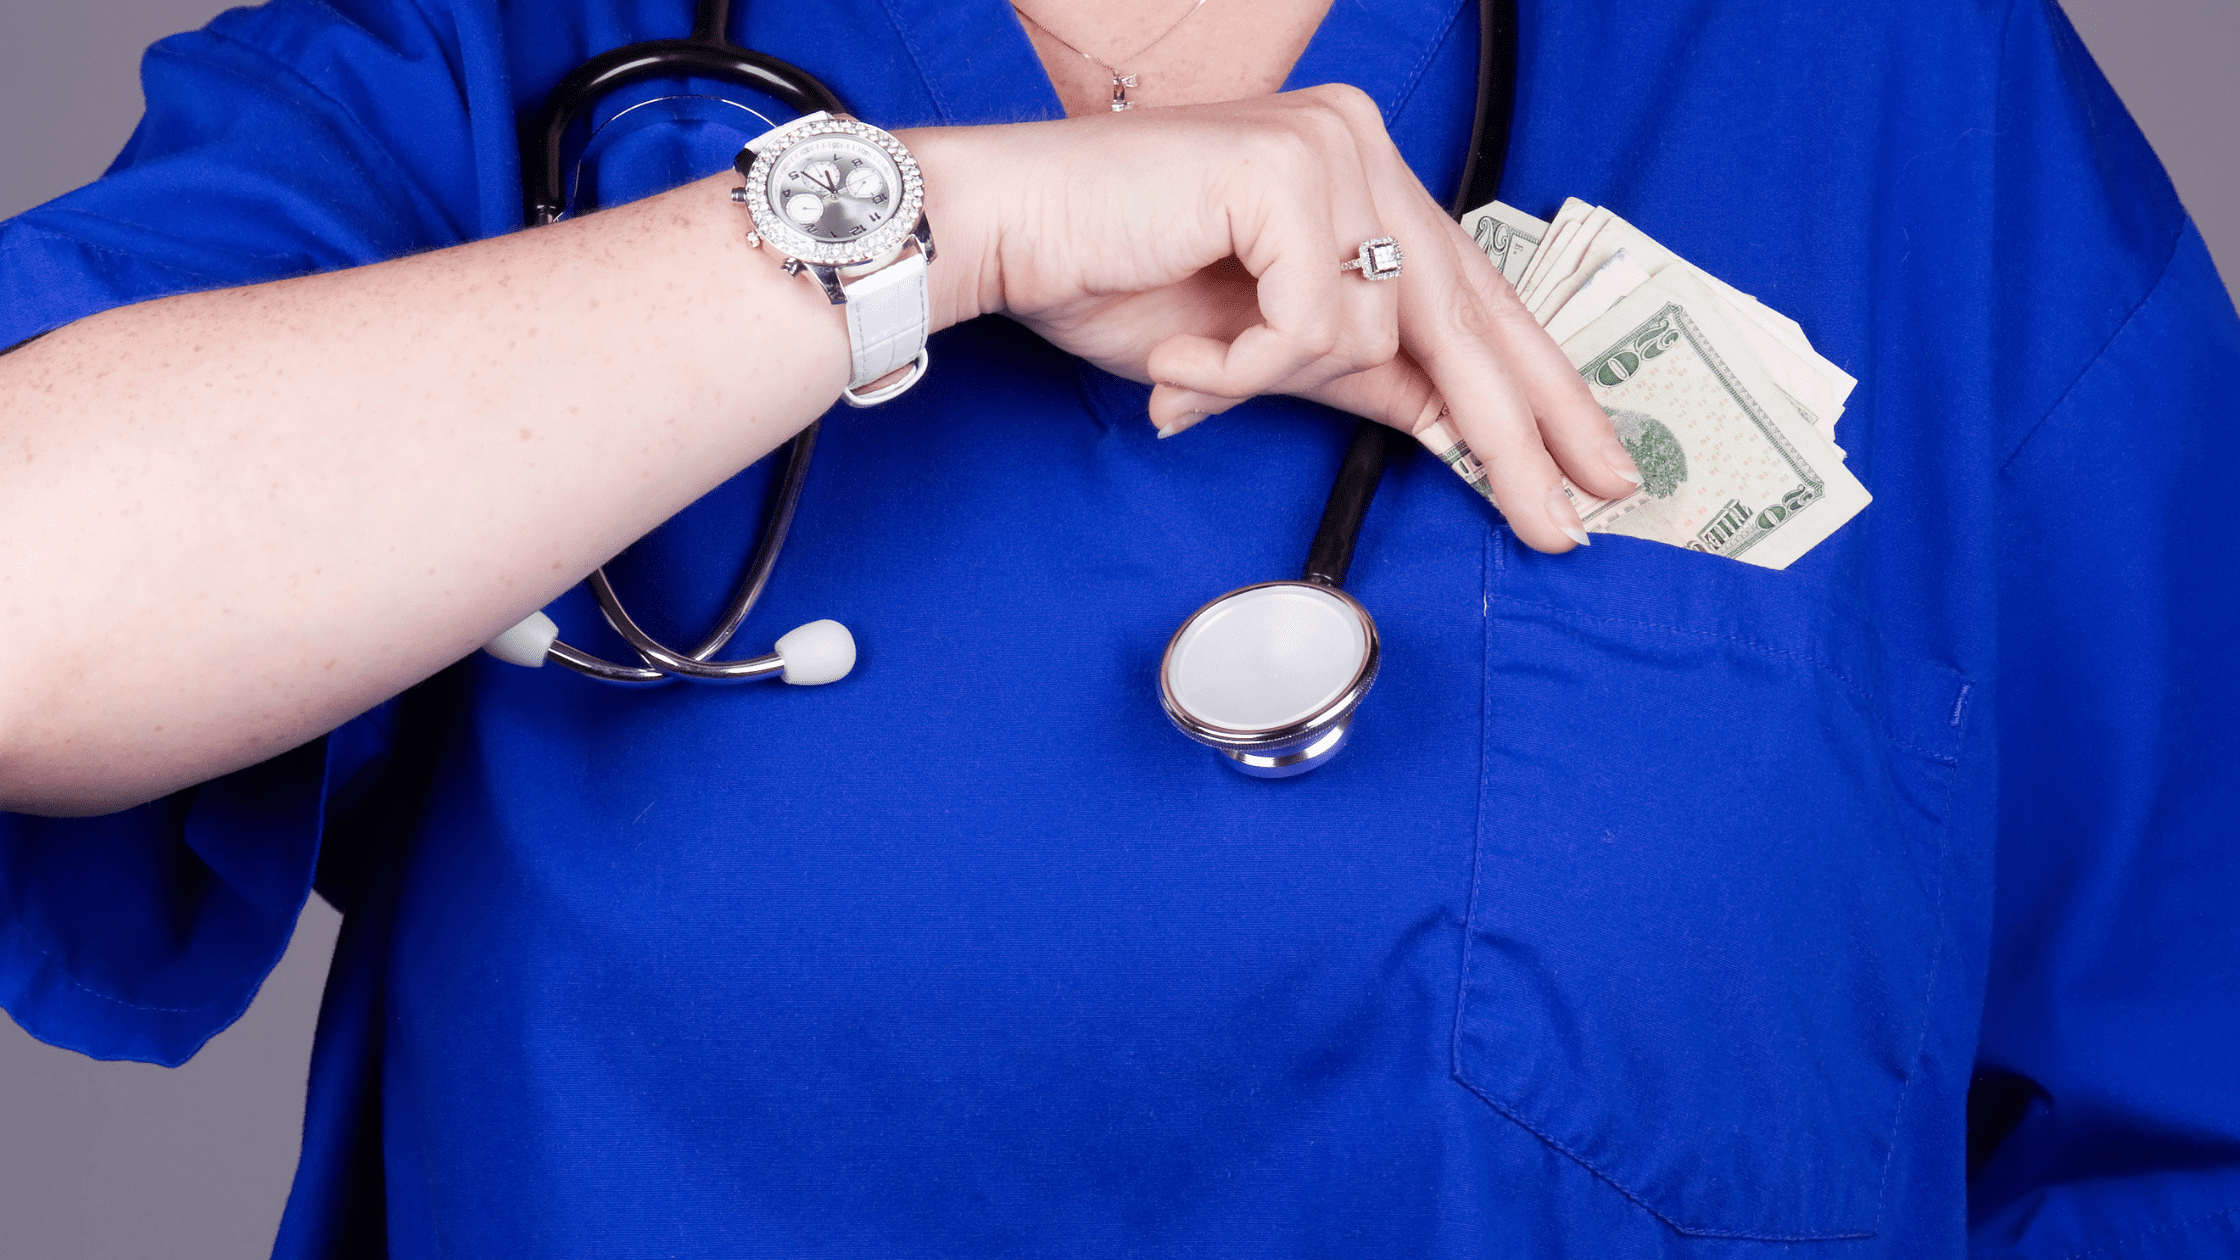 A medical school student in scrubs pulling a stack of money out of her shirt pocket.